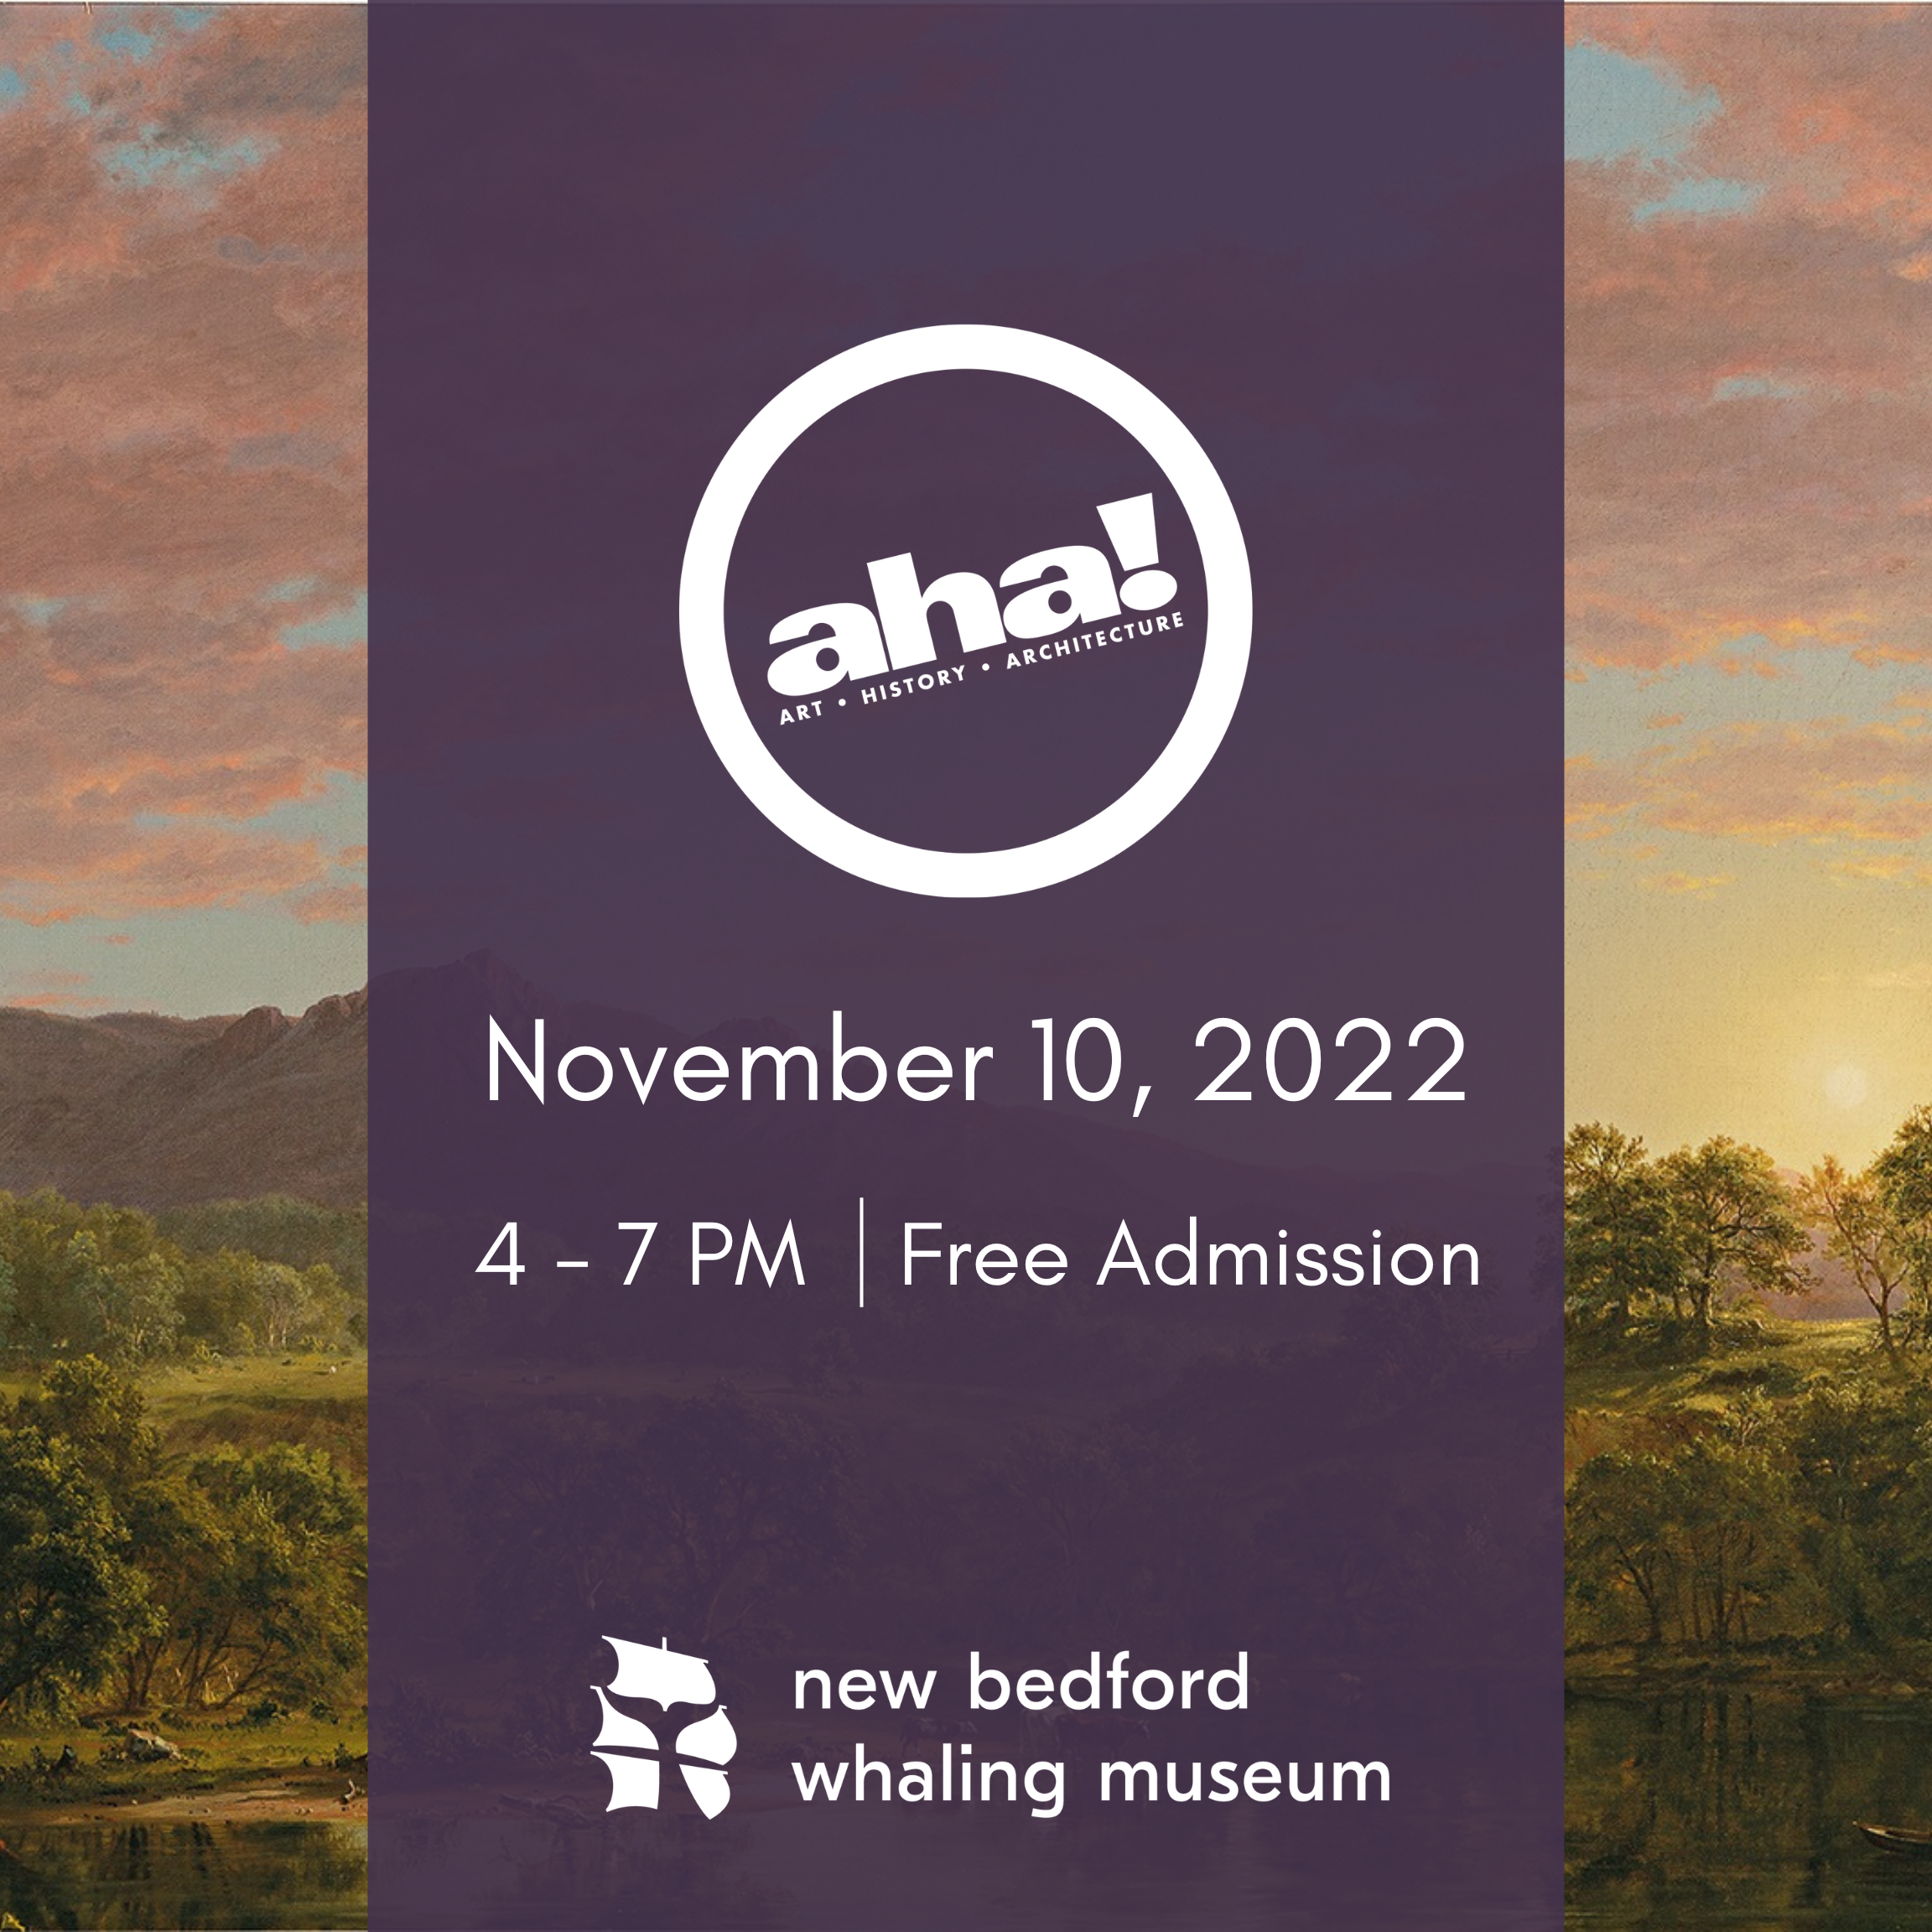 A poster for aha! There is text information in front of a background of a painting. The text reads: "November 10th, 2022. 4 - 7PM. Free Admission. New Bedford Whaling Museum.